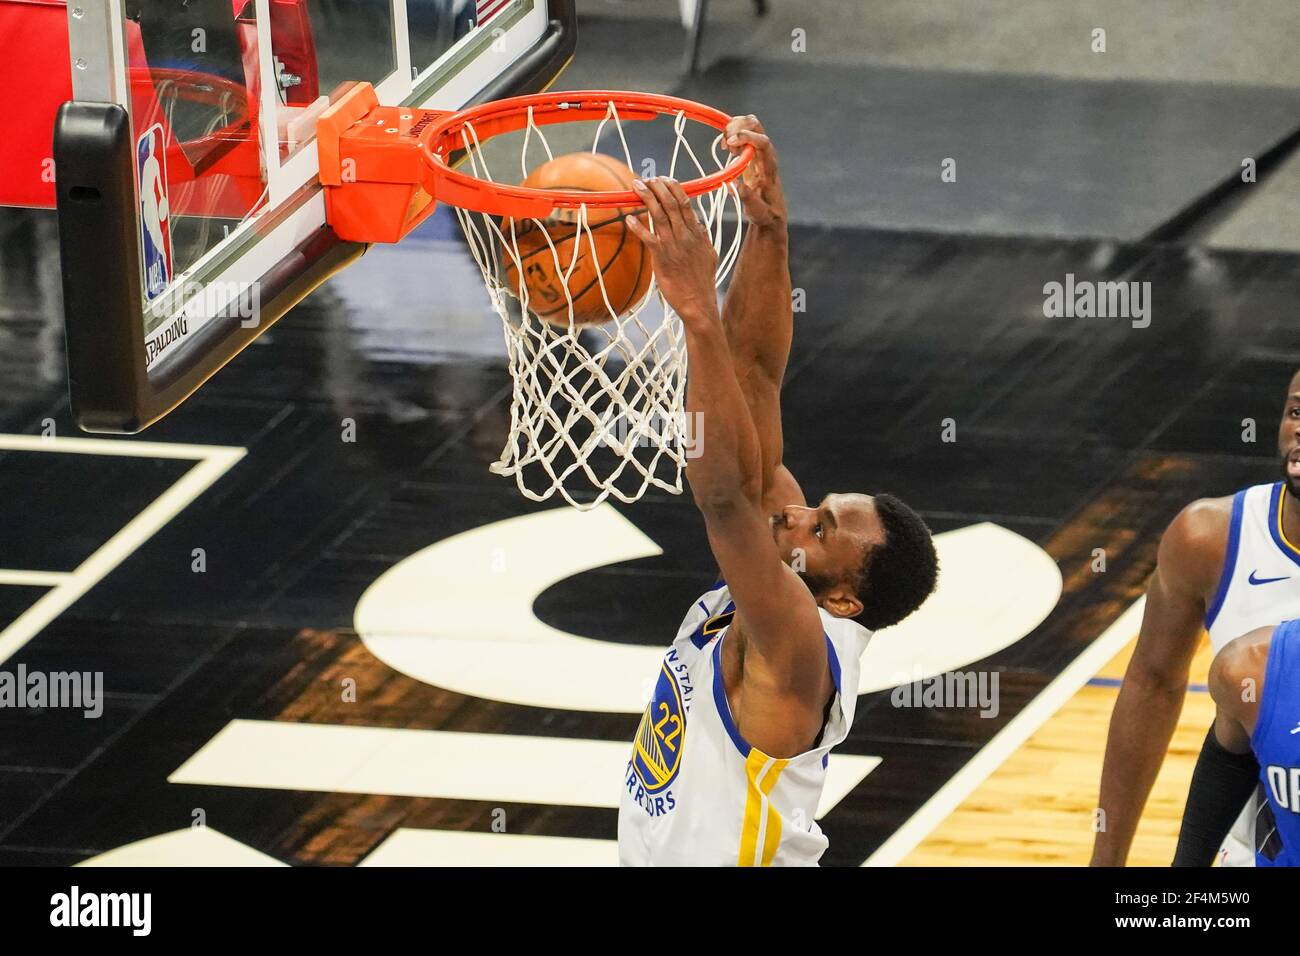 Orlando, Florida, USA, February 19, 2021, Golden State Warriors player Andrew Wiggins #22 makes a dunk against the Orlando Magic at the Amway Center  (Photo Credit:  Marty Jean-Louis) Stock Photo